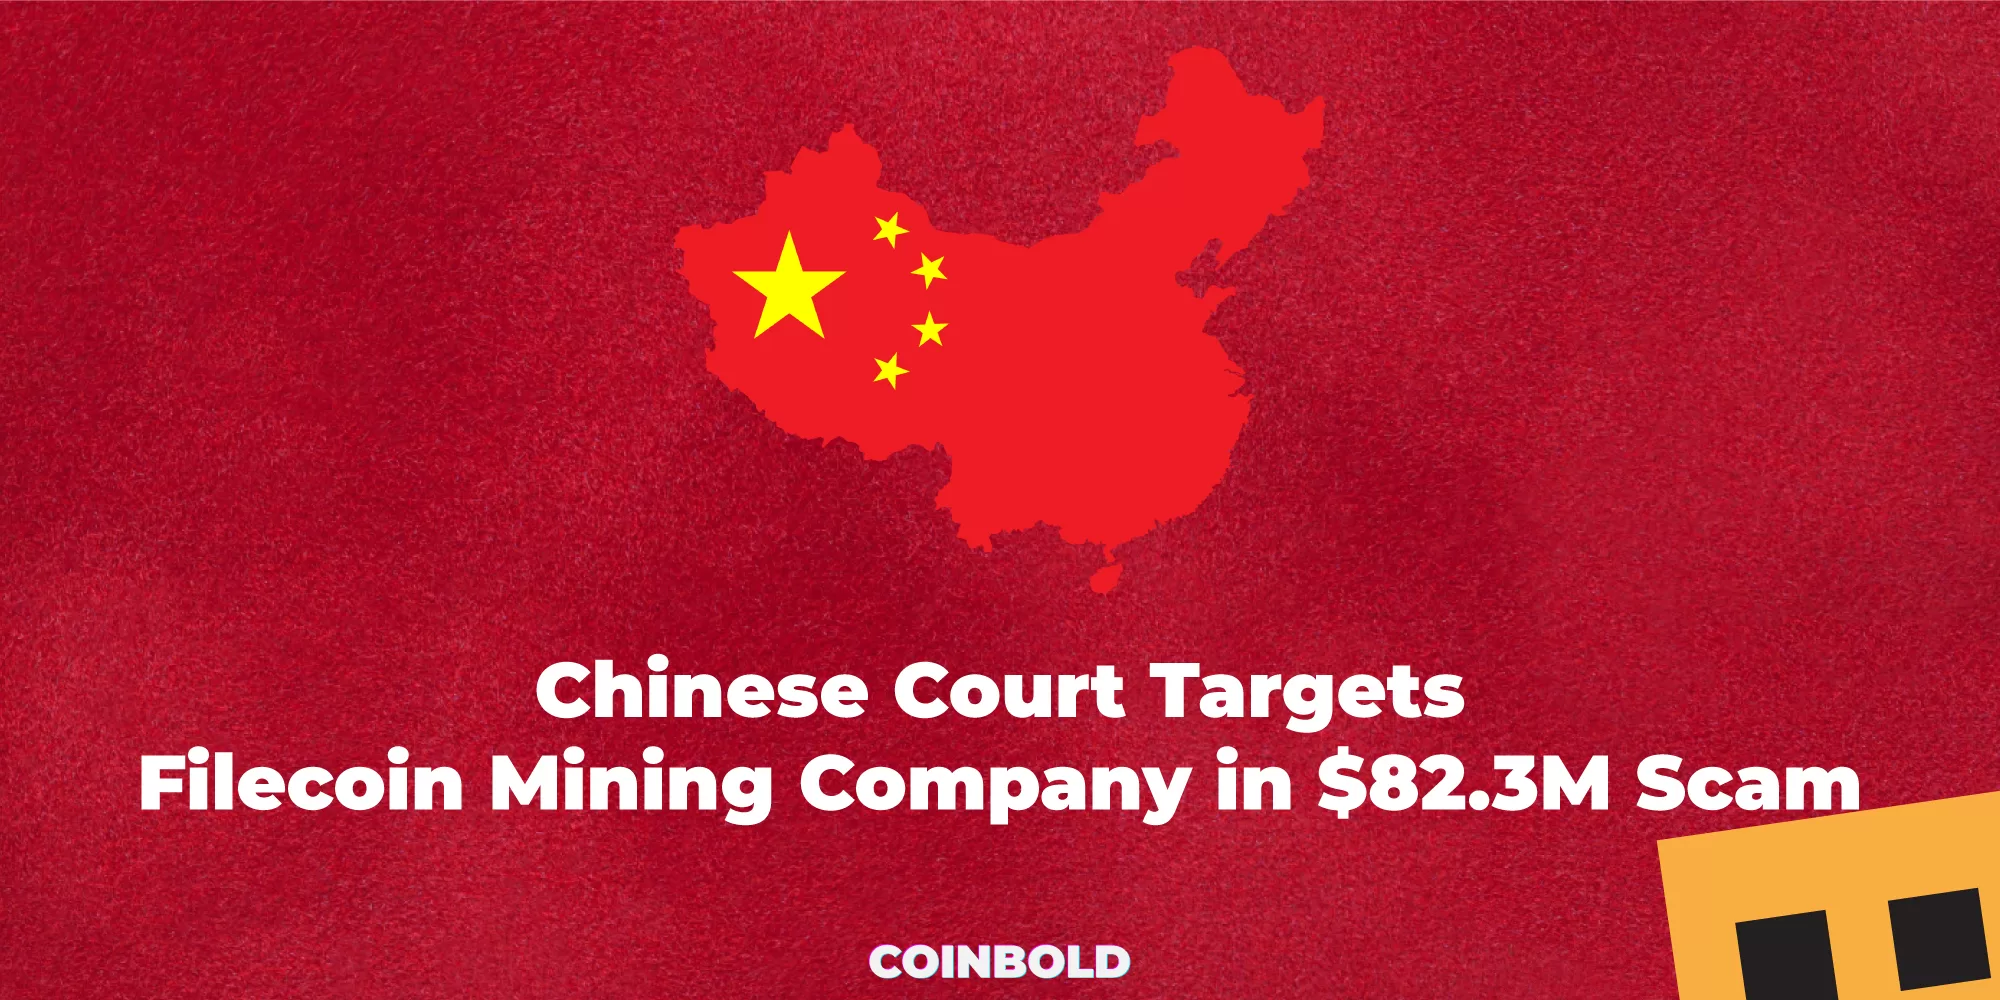 Chinese Court Targets Filecoin Mining Company in 82.3M Scam jpg.webp